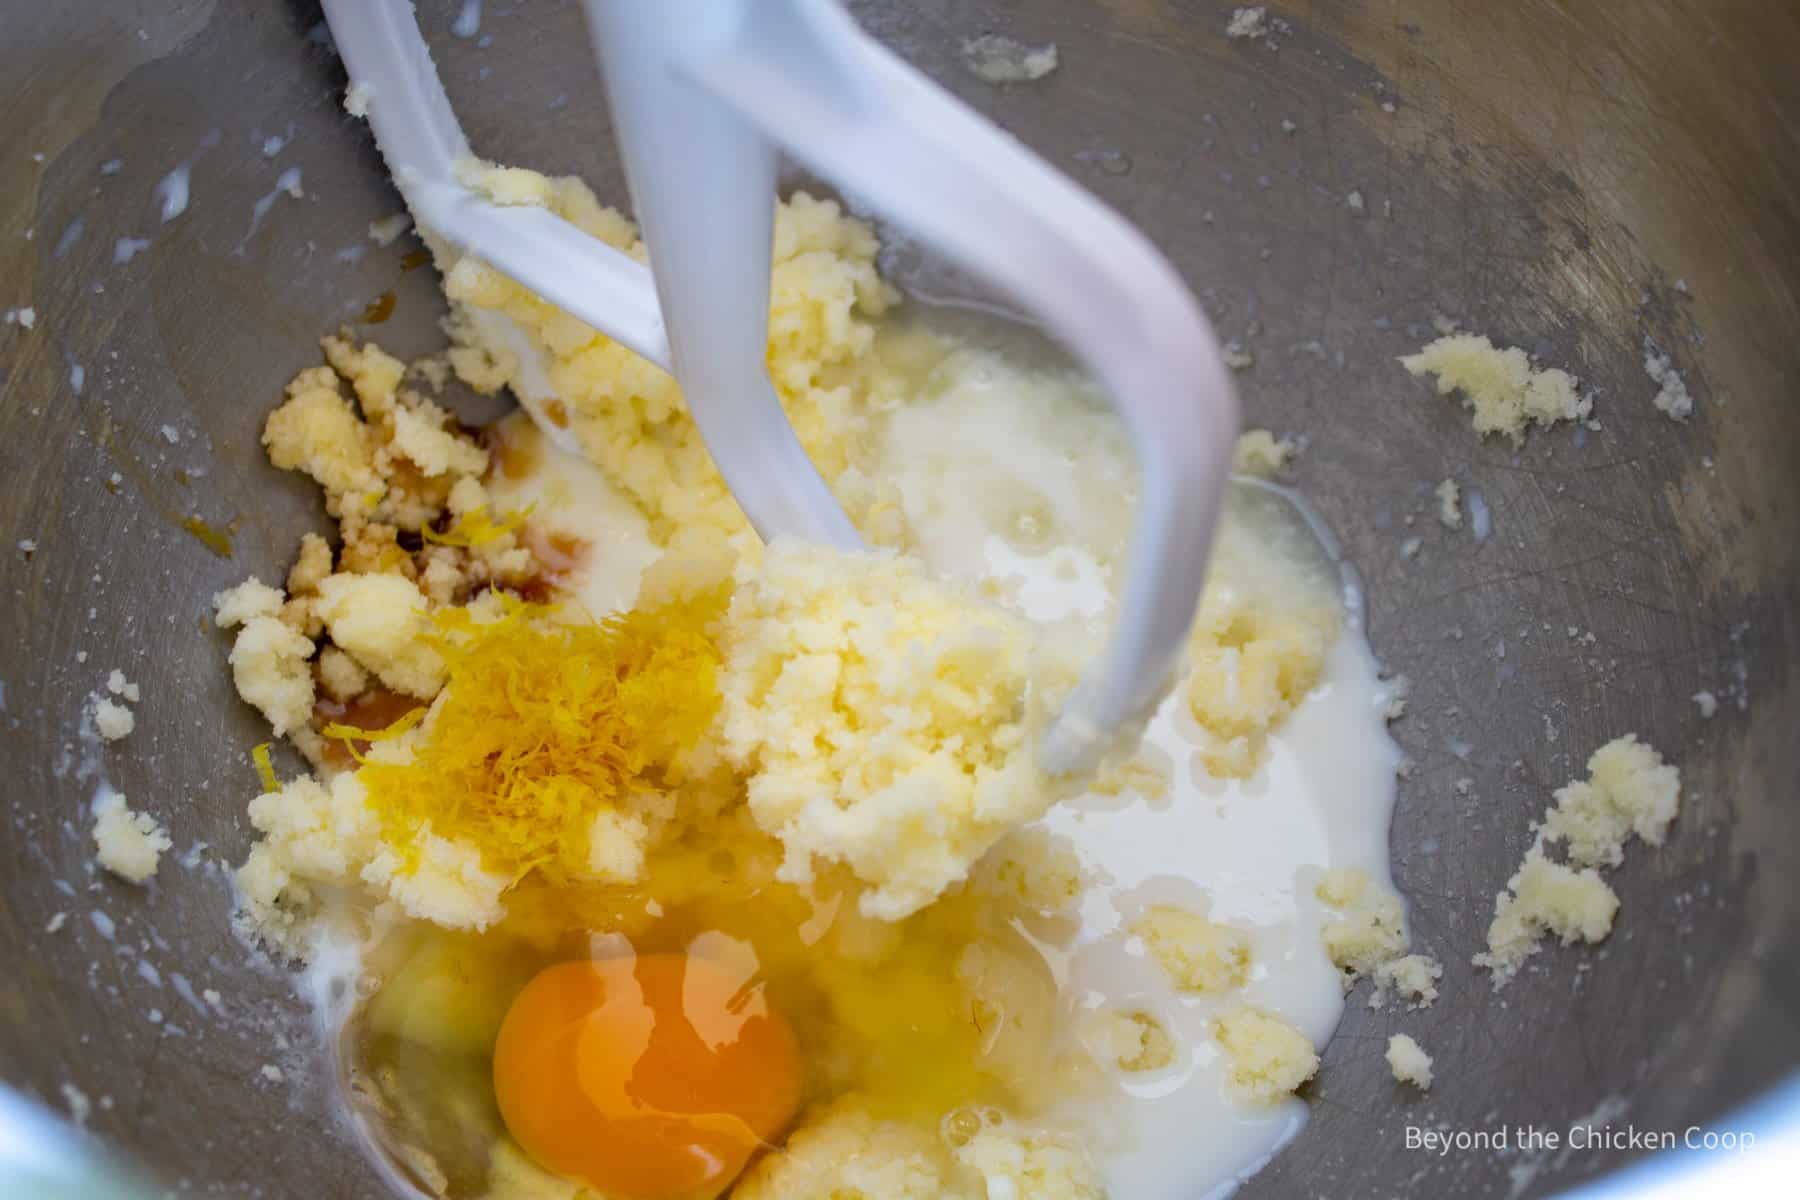 Eggs and milk added to a mixing bowl.